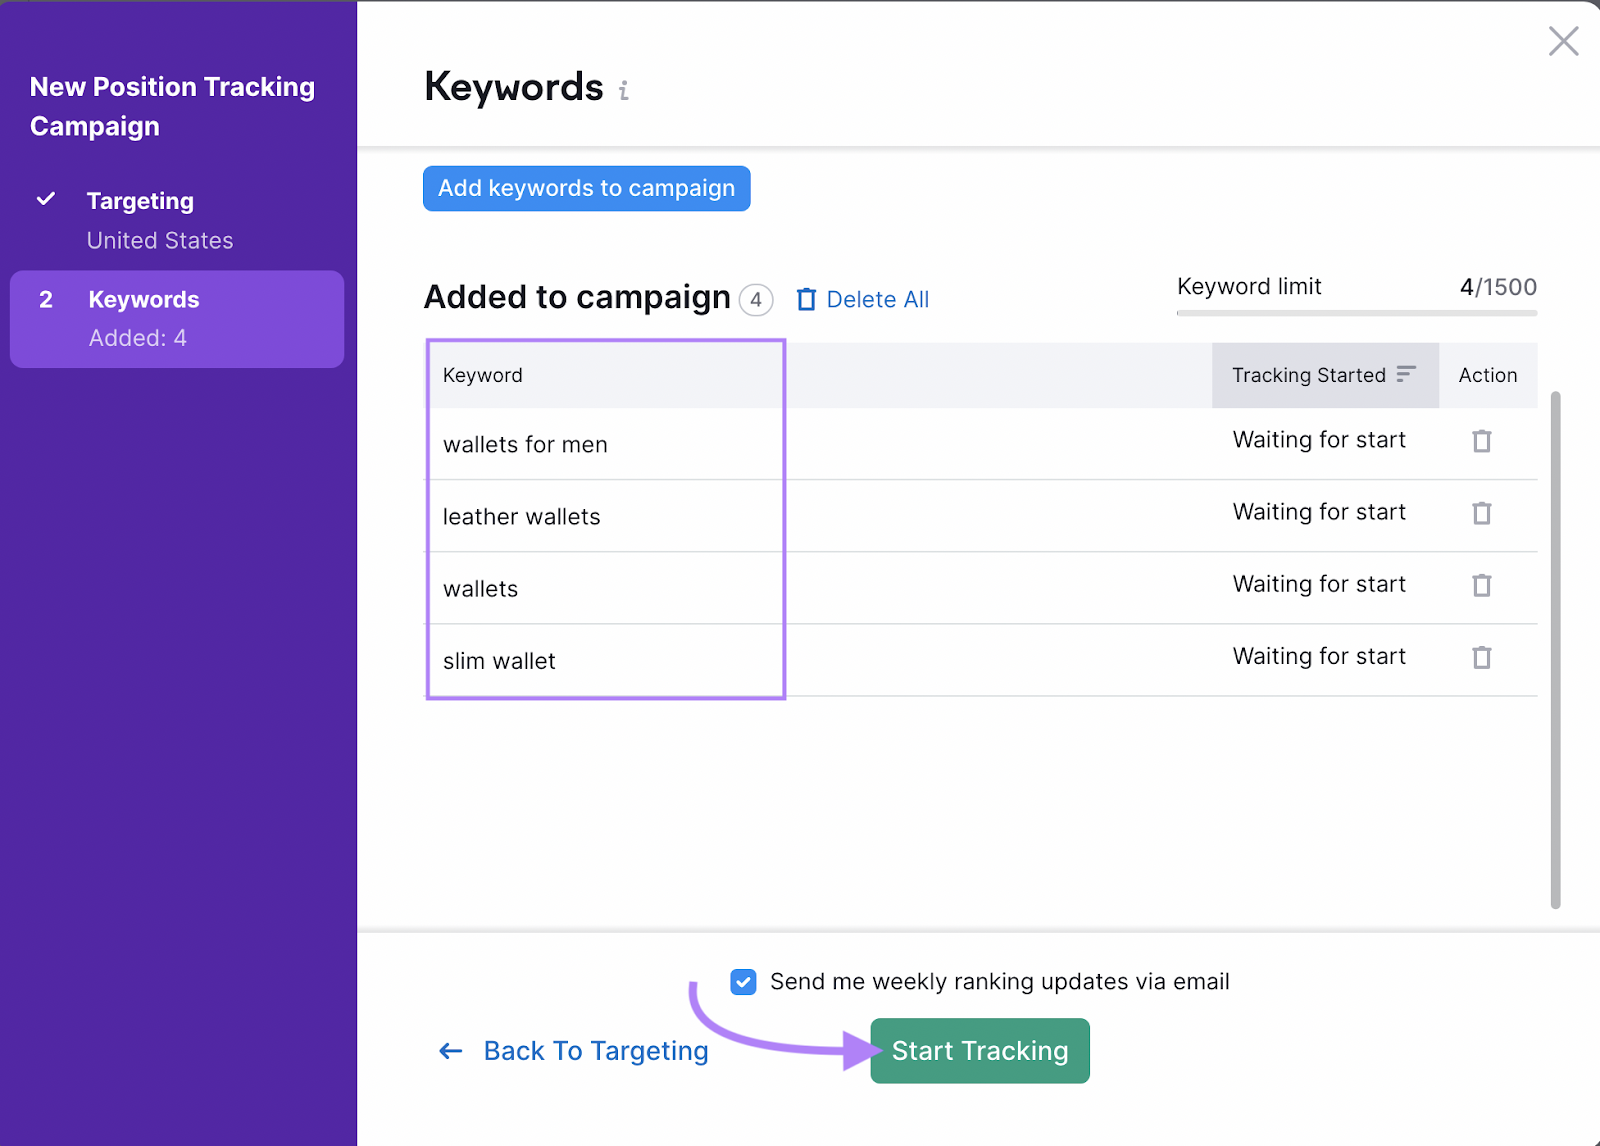 once you have set the target location and added keywords to campaign in Position Tracking tool, press "Start Tracking" button